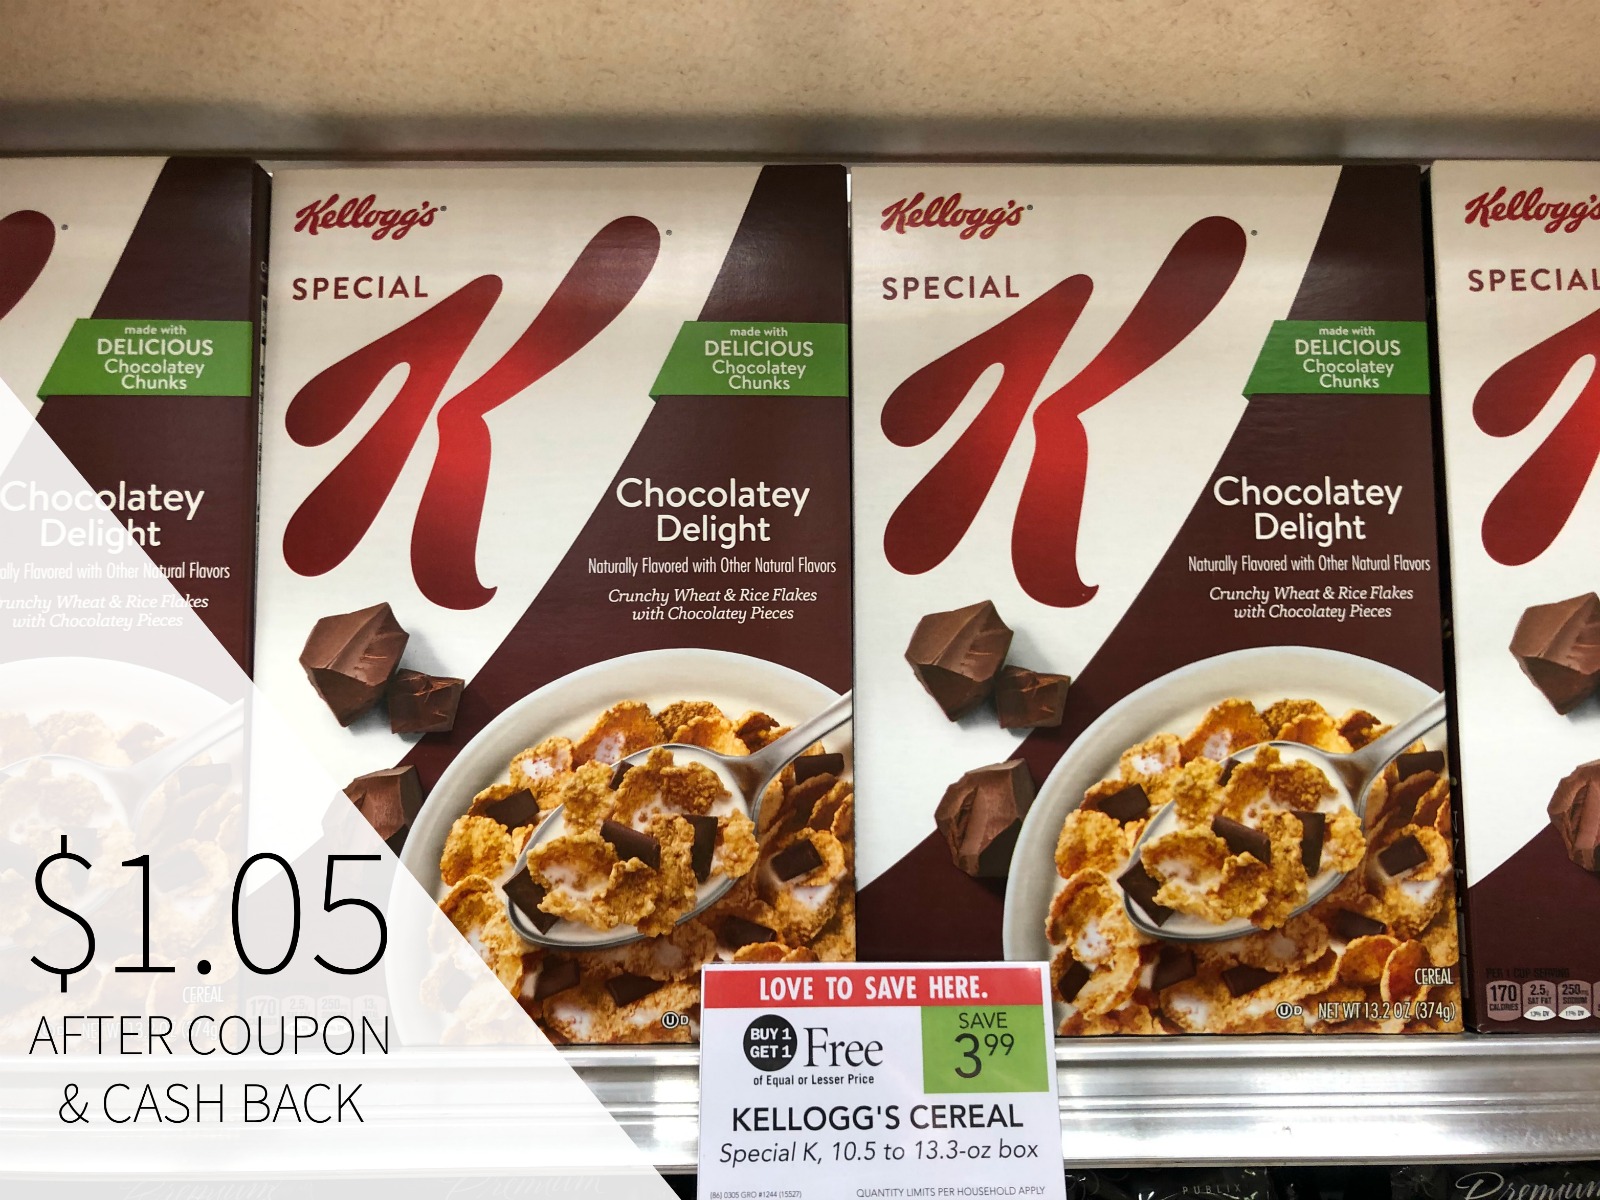 Stock Up On Your Favorite Kellogg's Cereals During The Publix BOGO Sale! on I Heart Publix